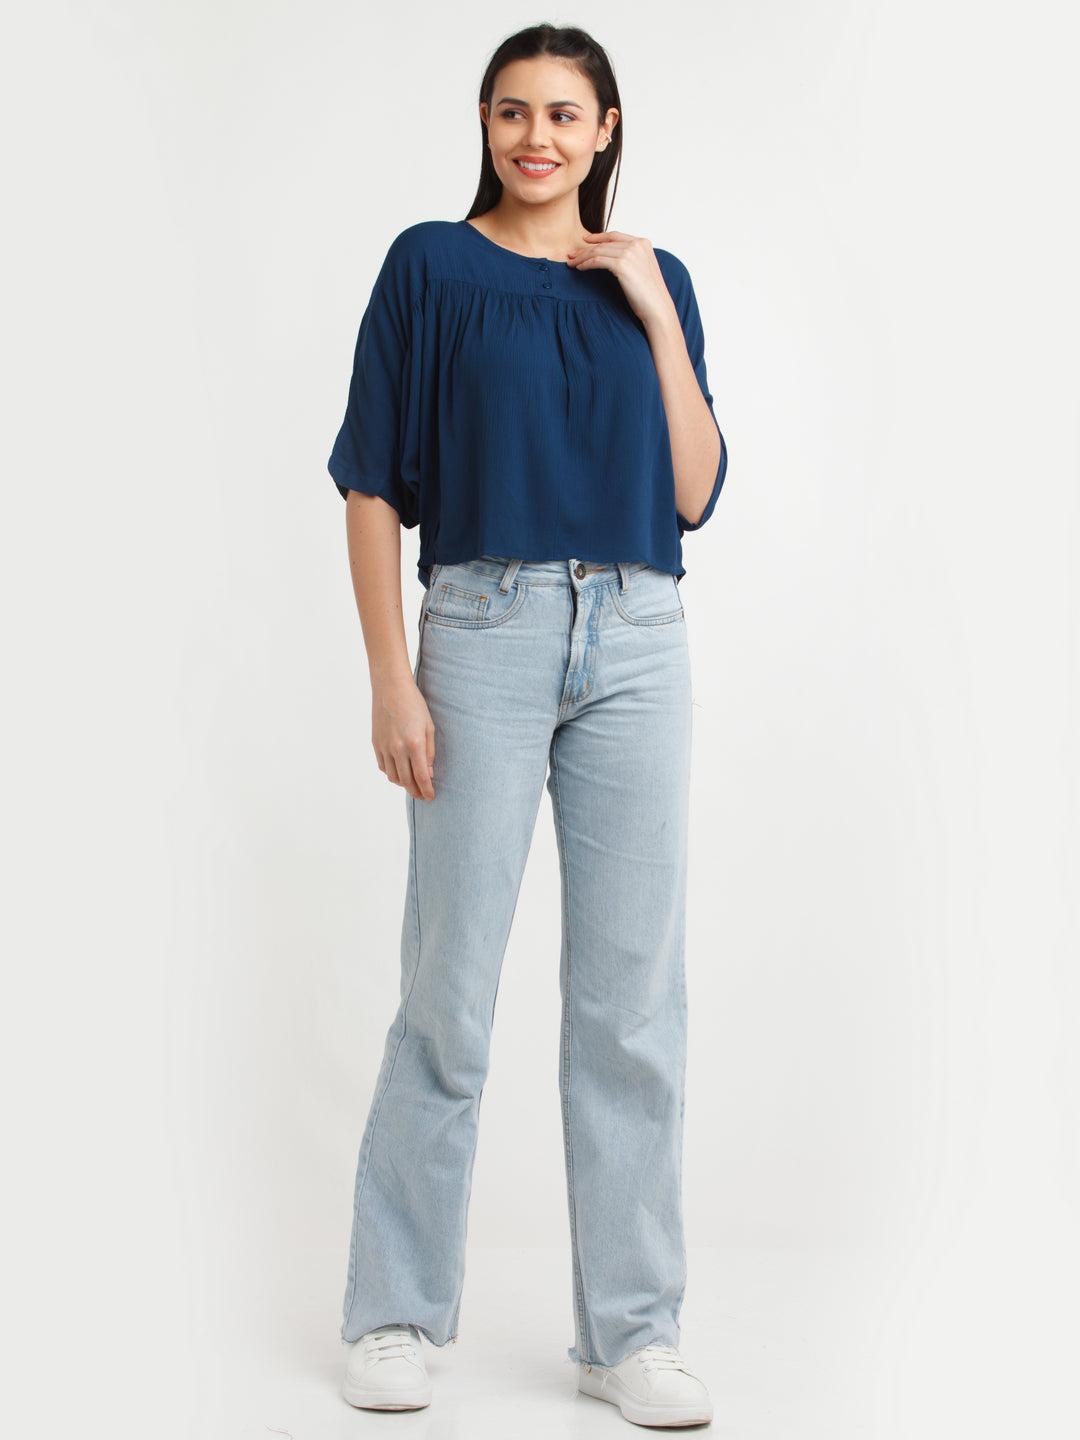 navy-blue-solid-top-for-women